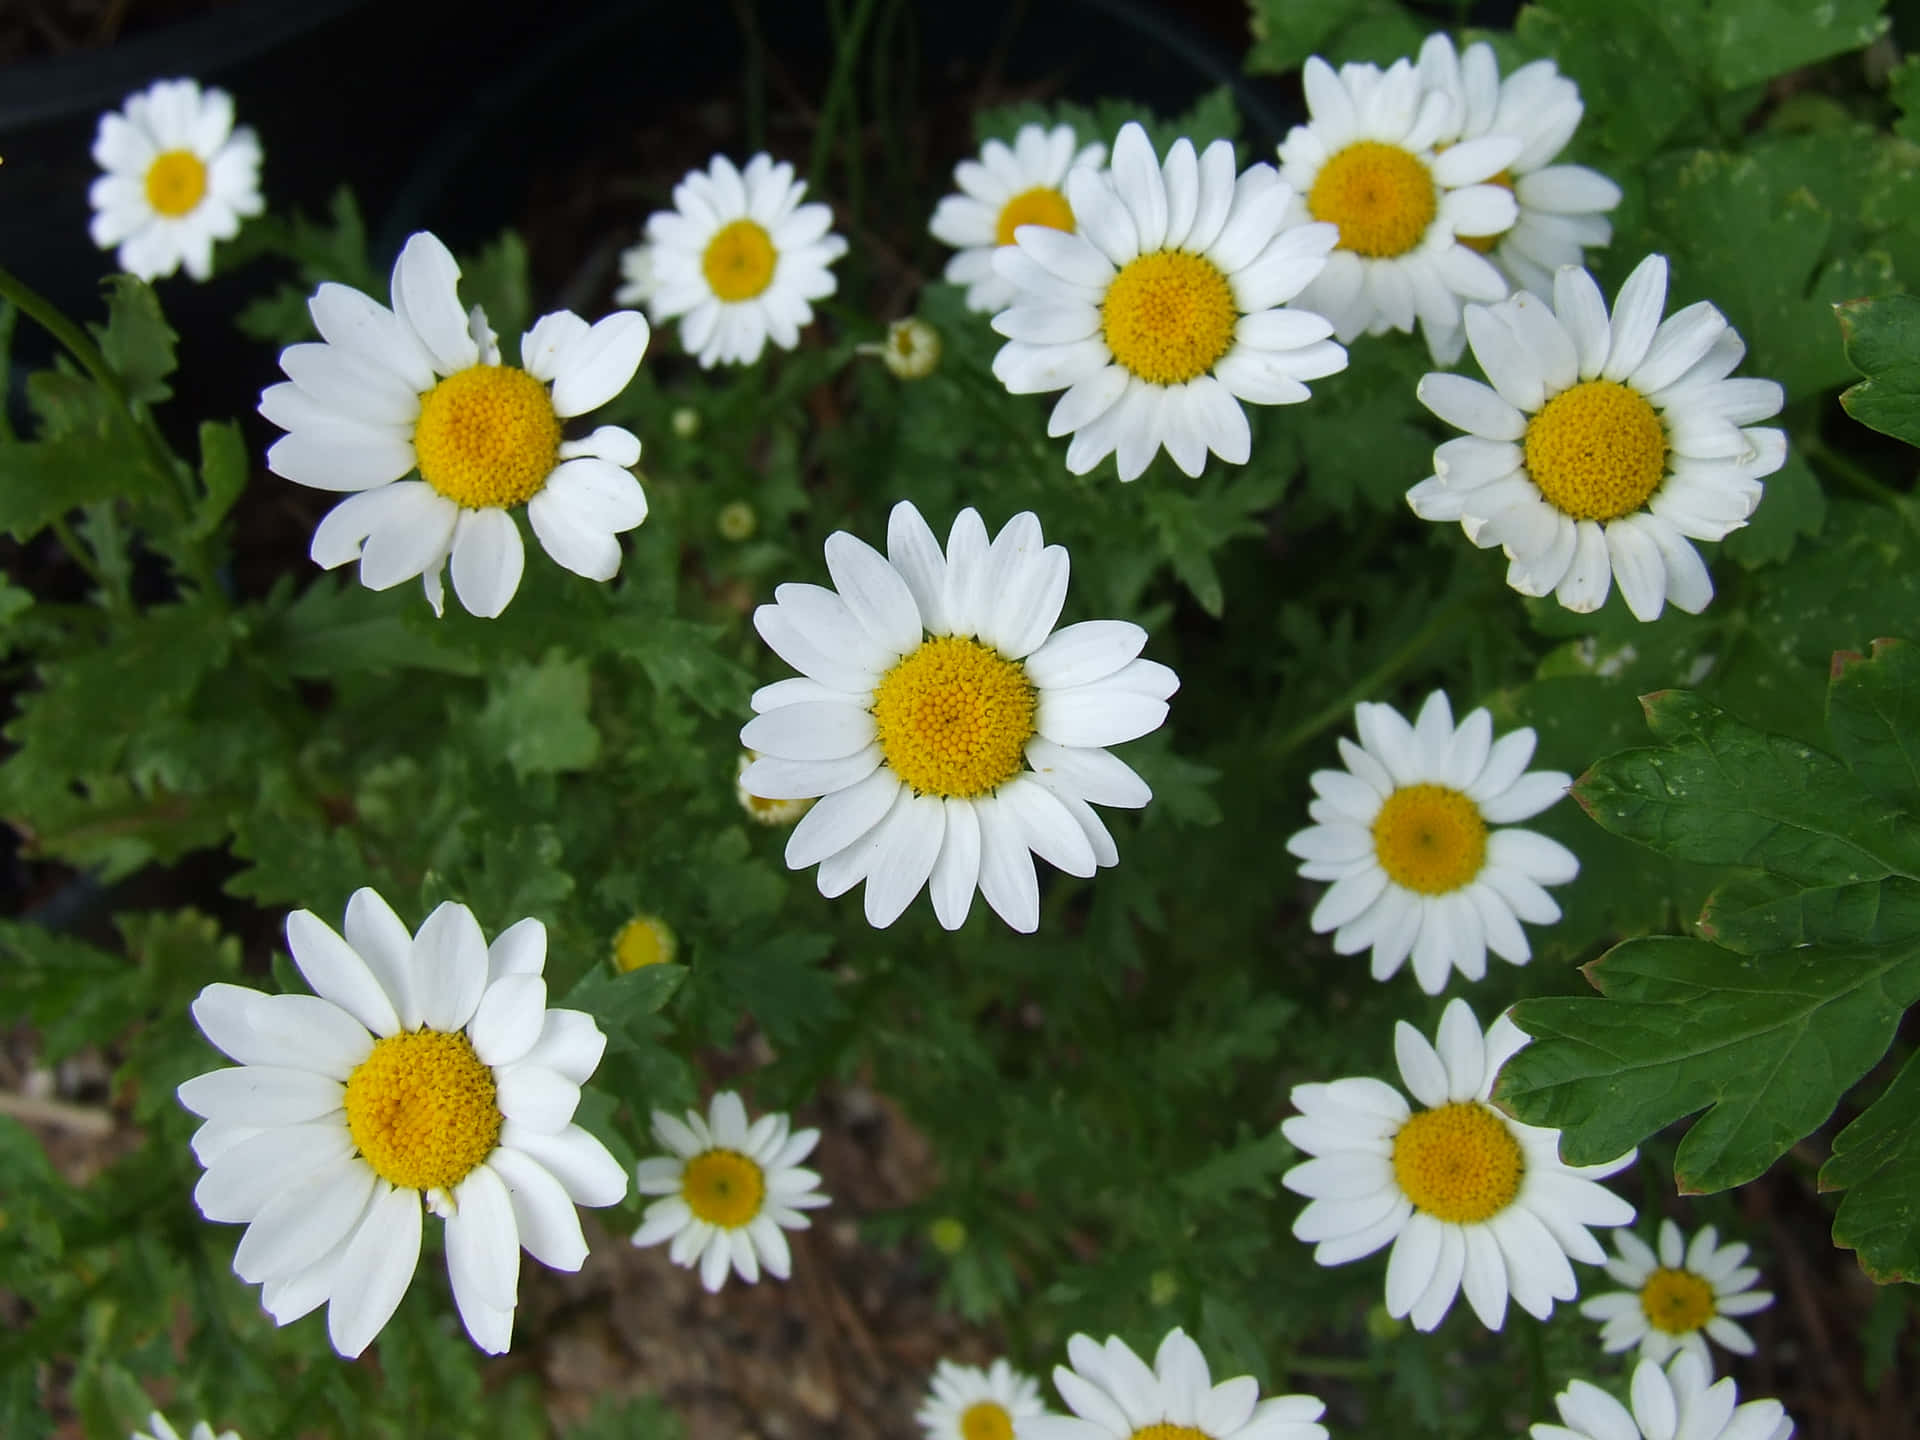 A blooming daisy in full glory